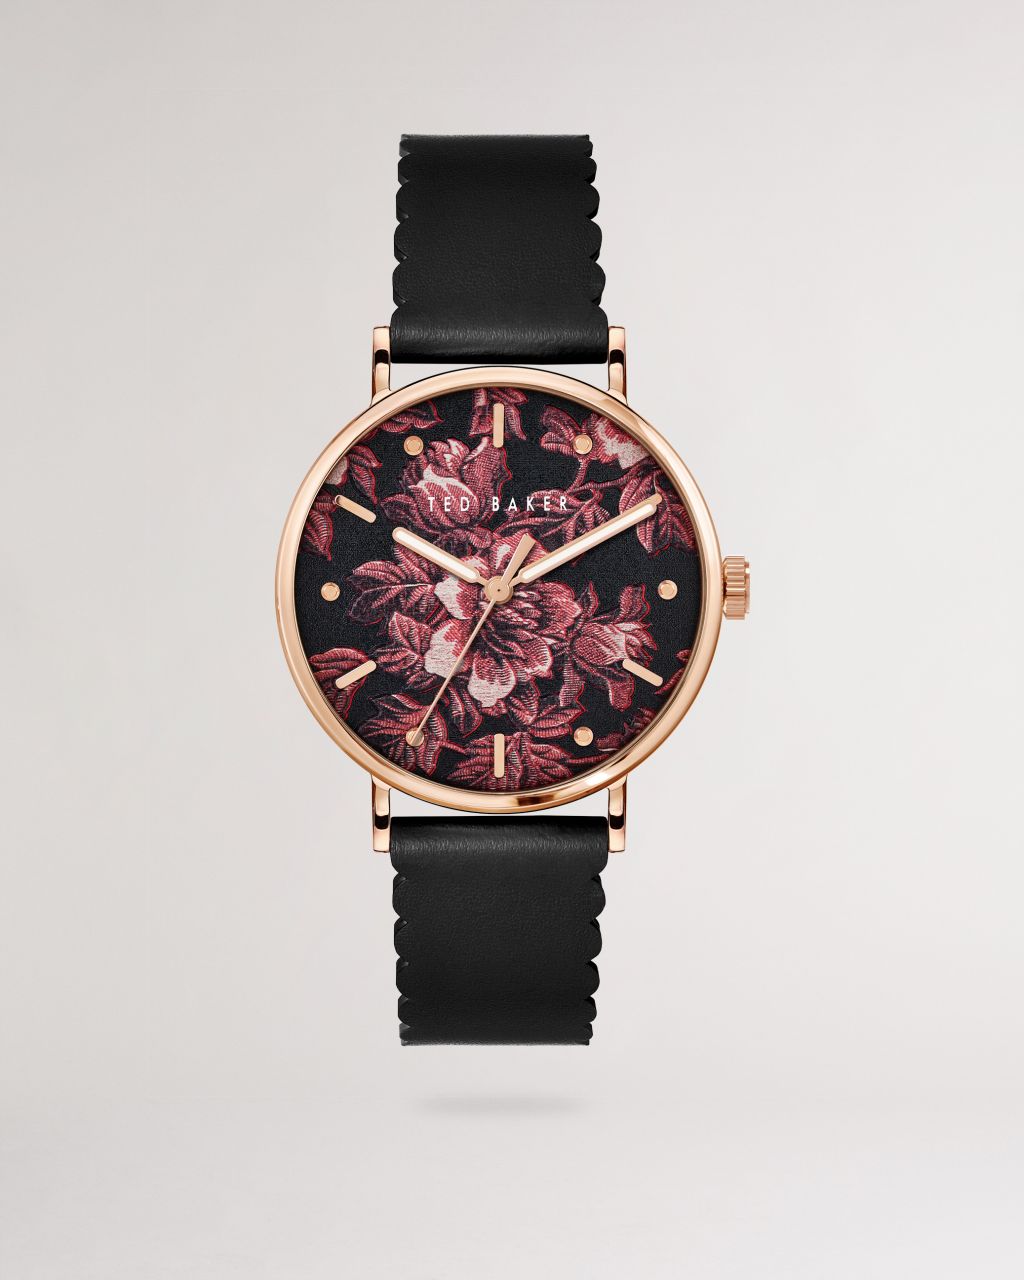 Ted Baker Women's Glitched Floral Printed Dial Watch in Black, Phyliis, Leather